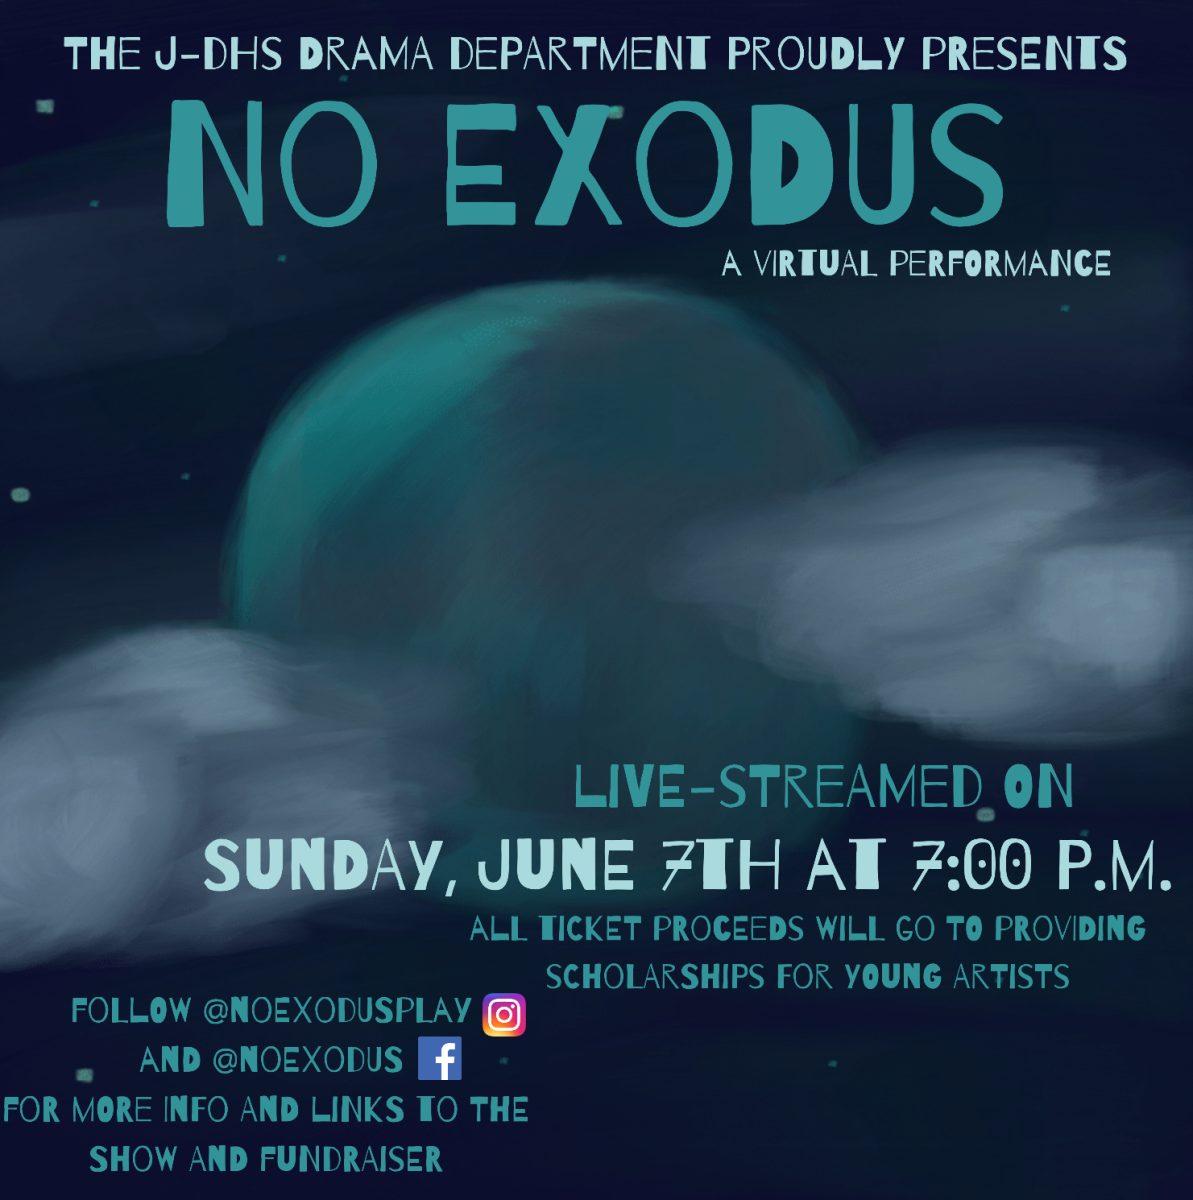 SAVE+THE+DATE%3A+%C2%A8No+Exodus%C2%A8+Virtual+Performance+and+Fundraiser